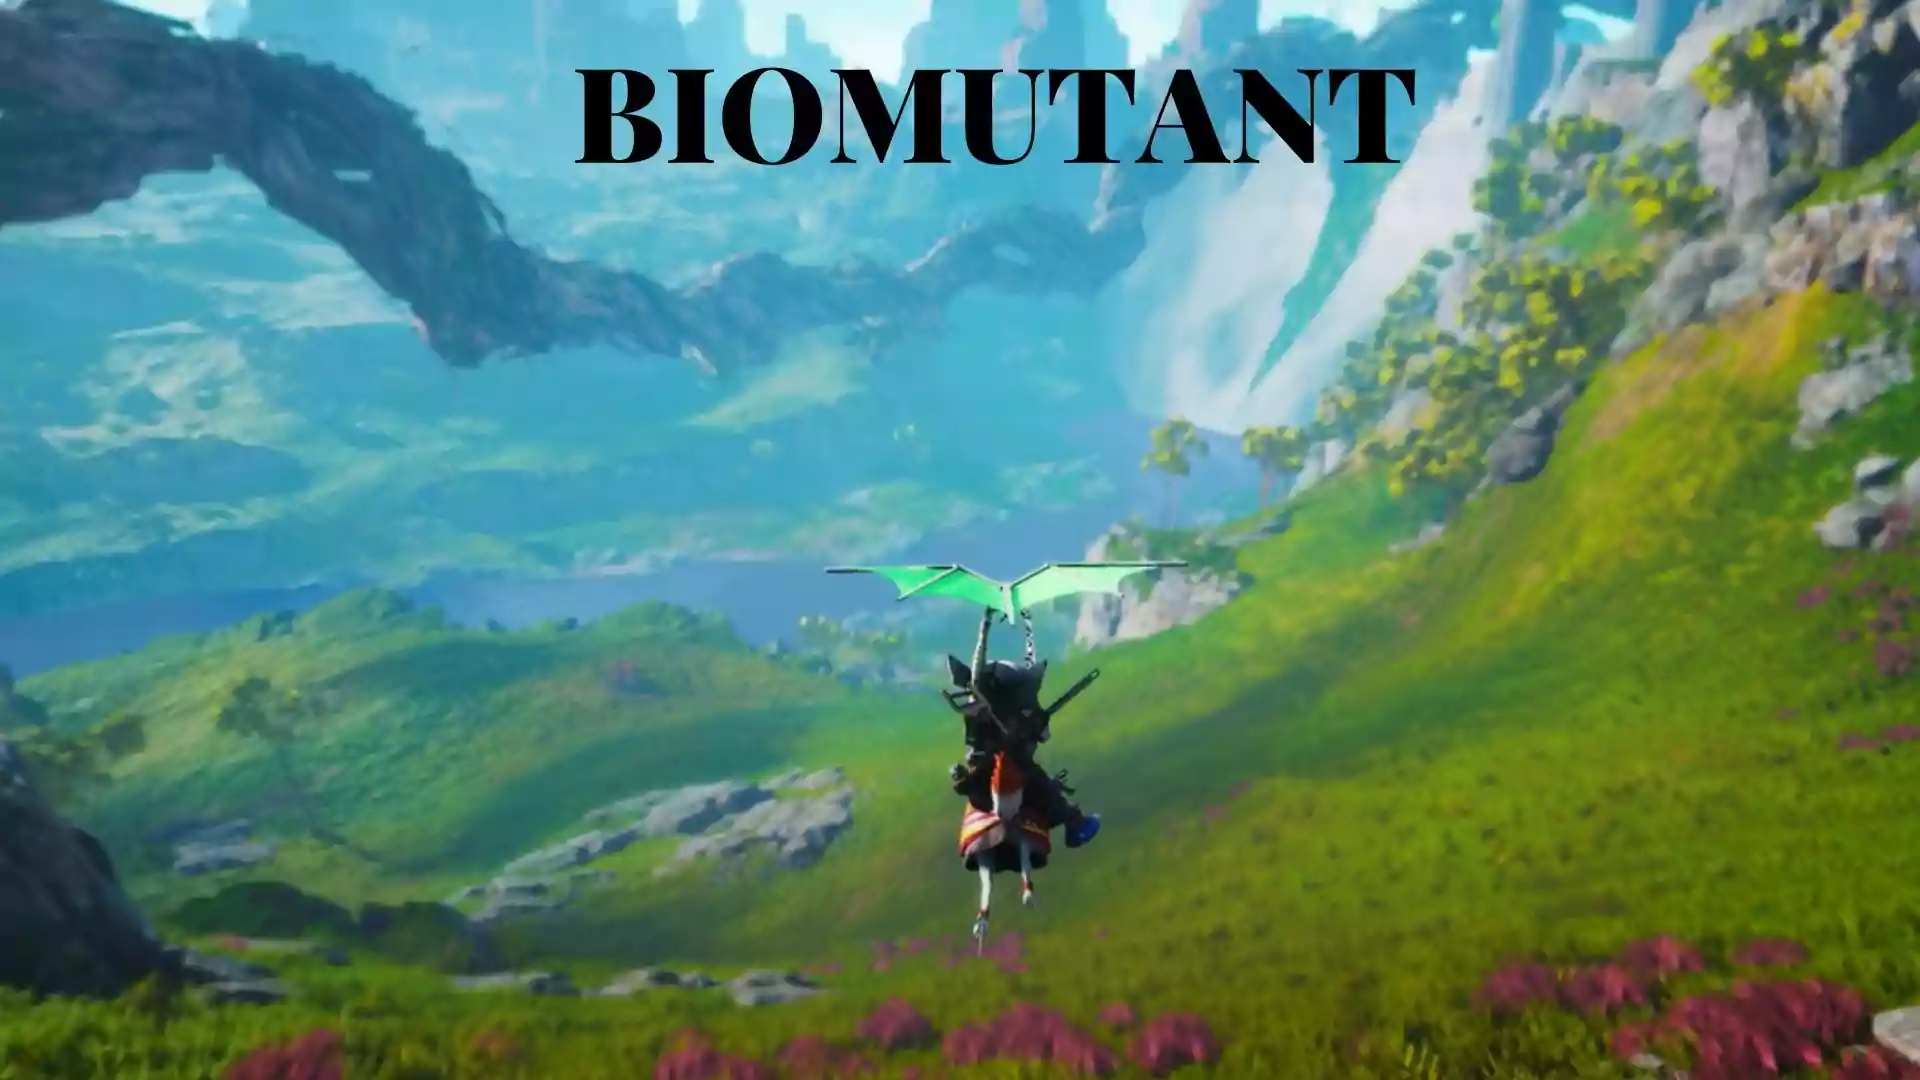 Biomutant Parents Guide and Age Rating